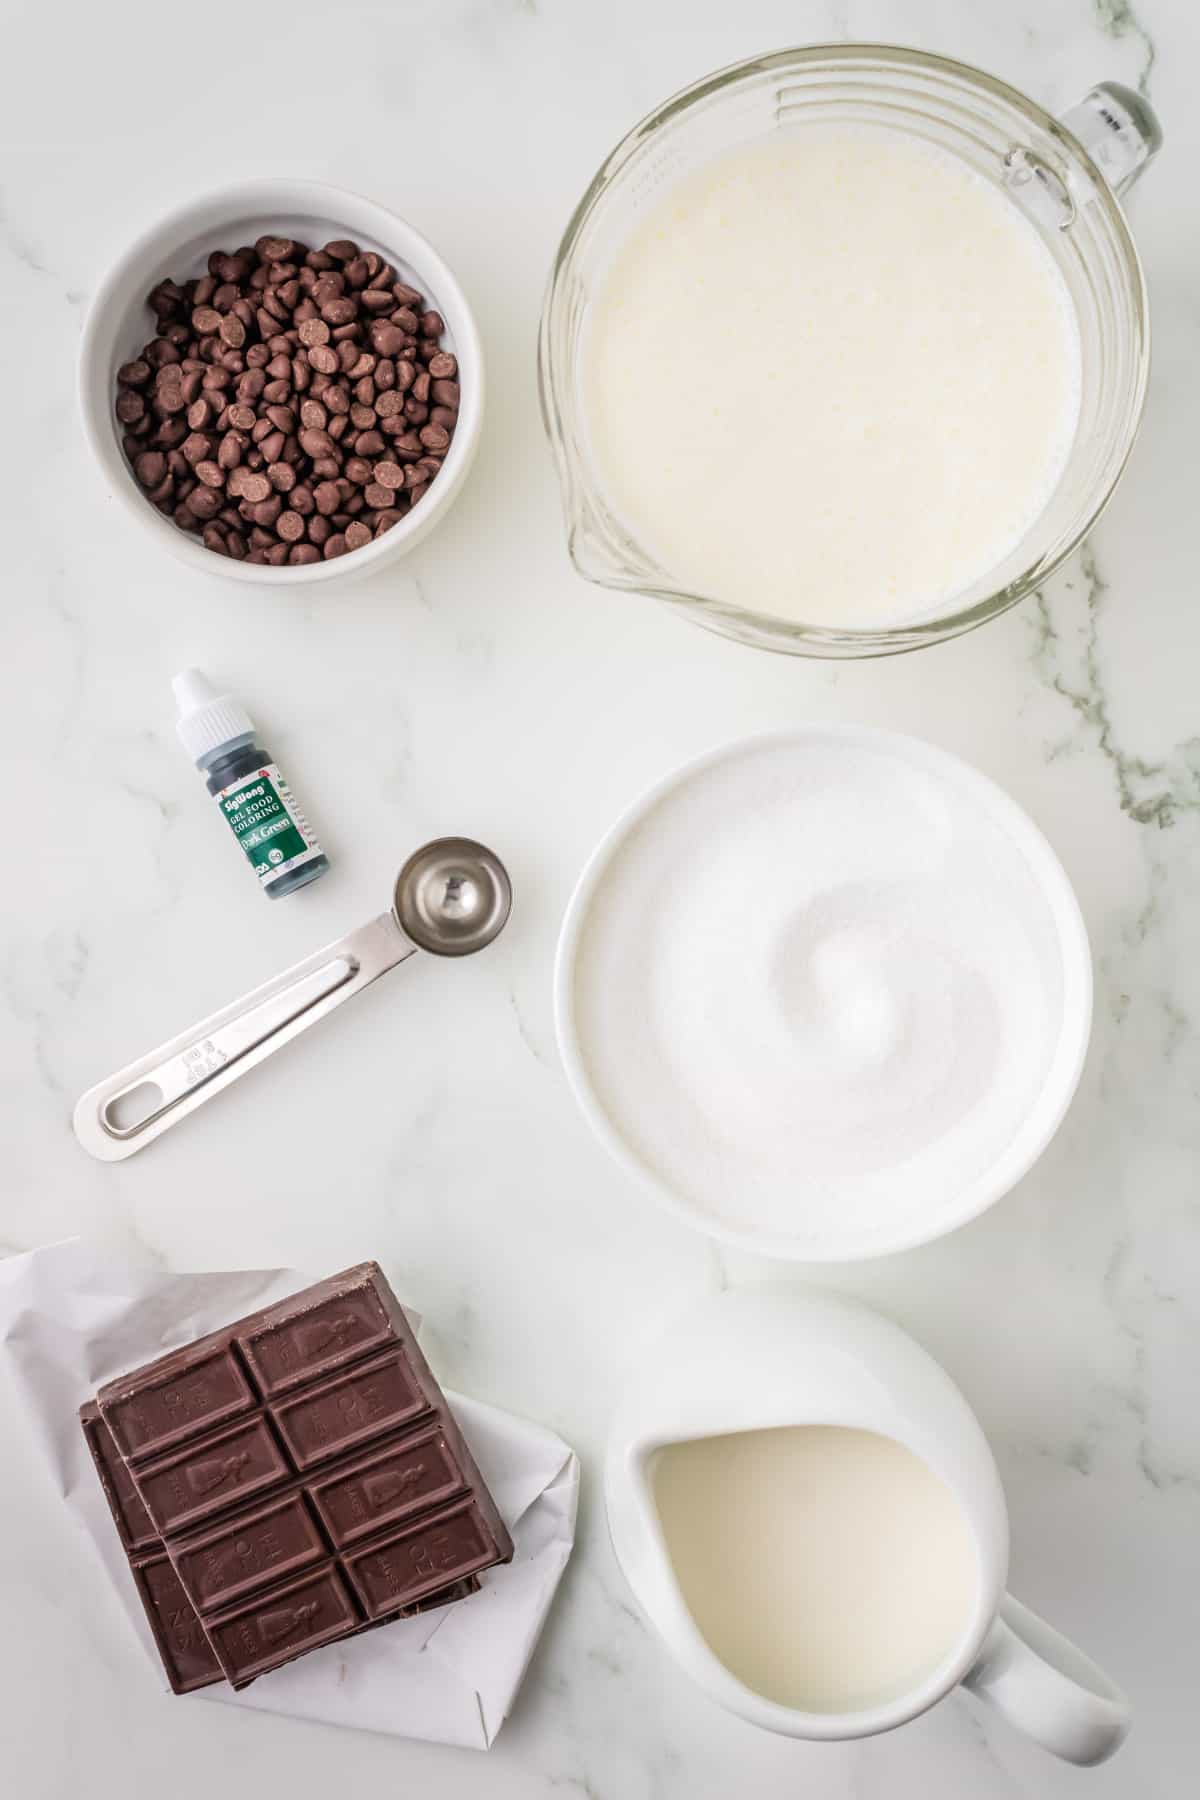 Ingredients for mint chip ice cream: heavy cream, sugar, milk, chocolate candy bar, chocolate chips, mint extract, and green food coloring.